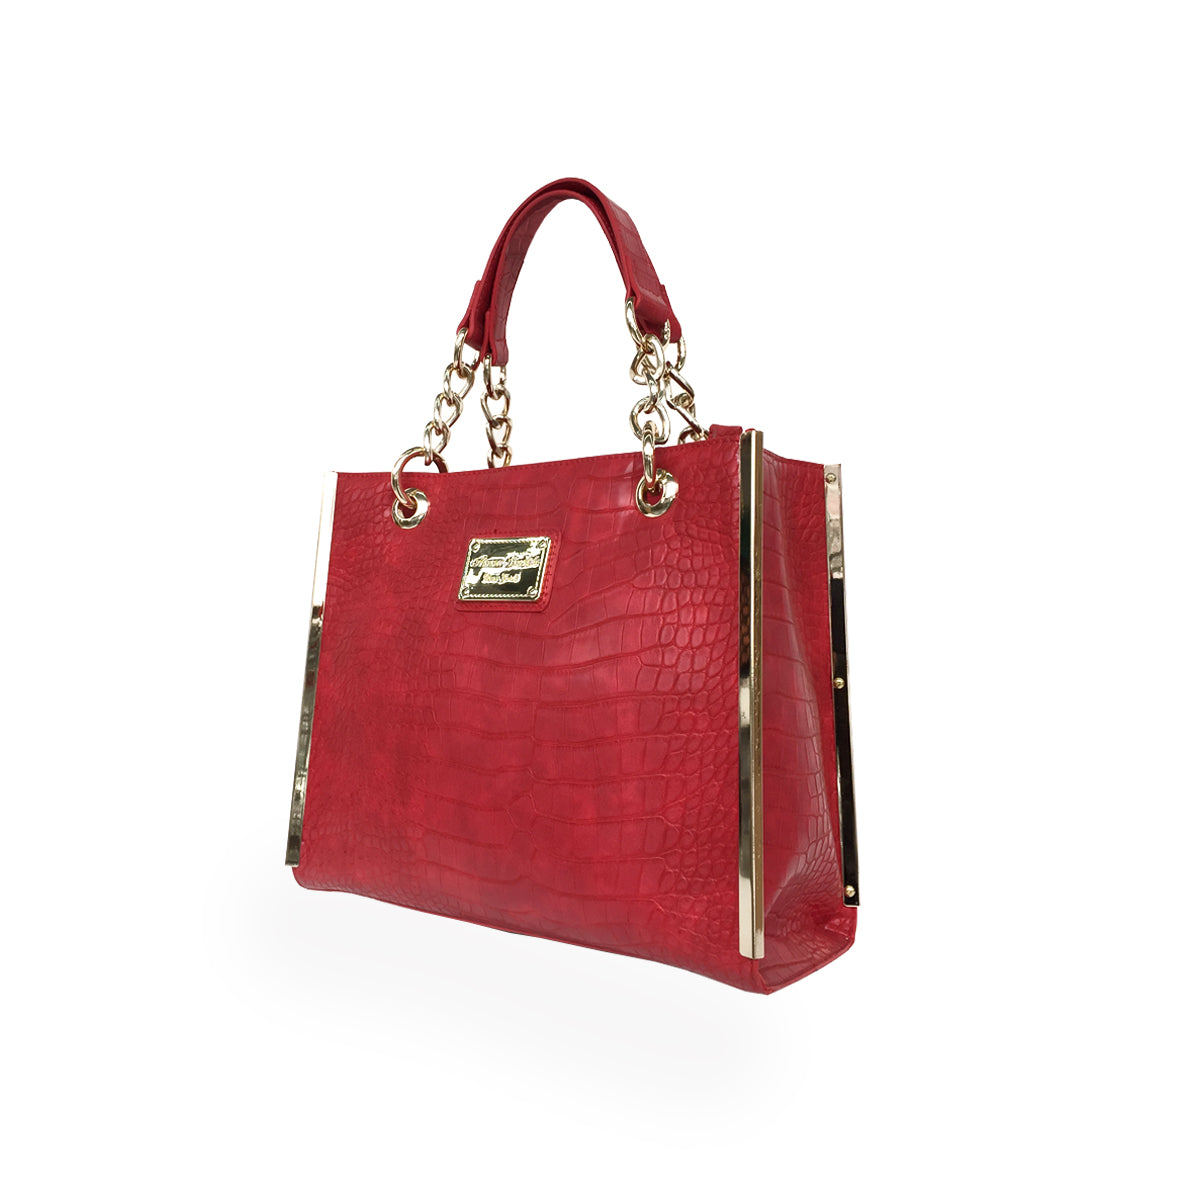 New In Stock Designer Handbags Shoes And Accessories - Bag Envy